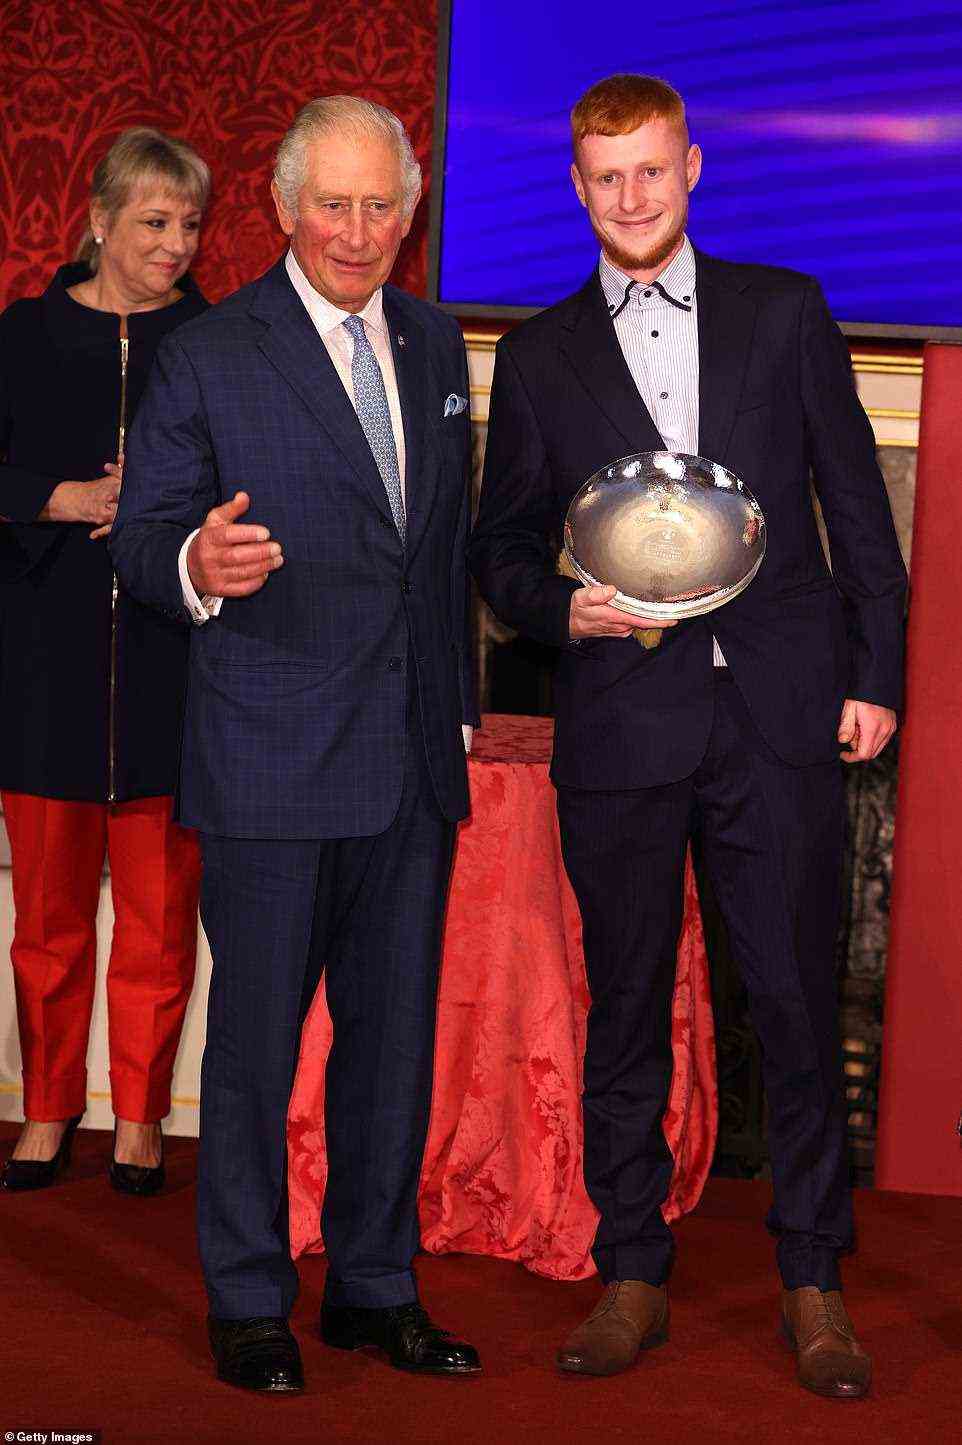 The Prince of Wales alongside winner of the Homesense Young Achiever Award, Thomas Pemberton